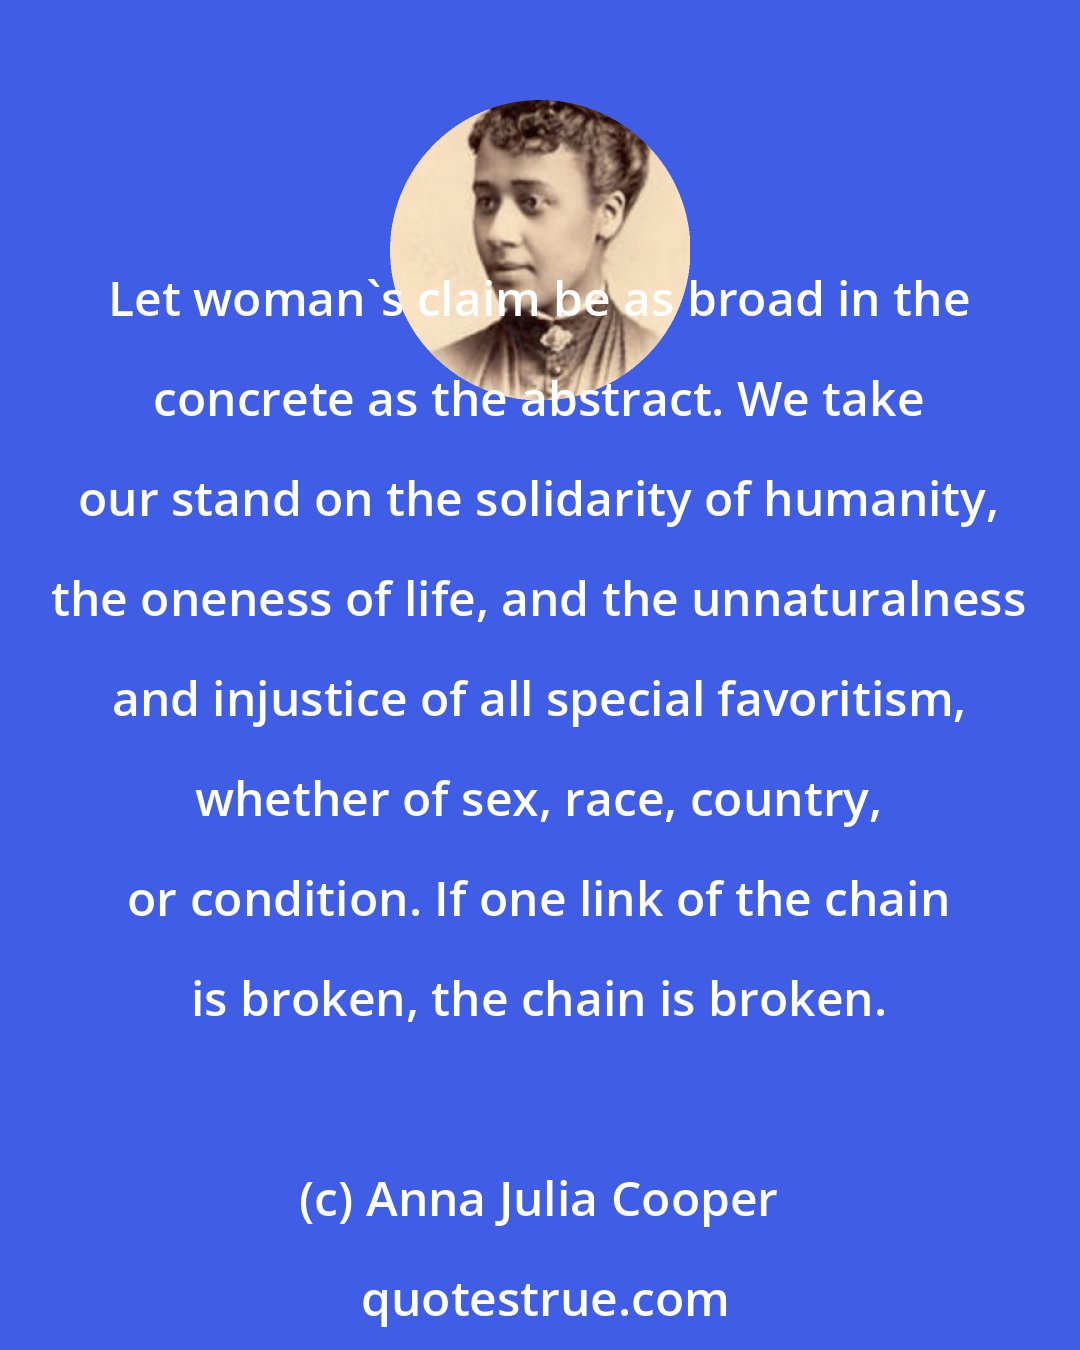 Anna Julia Cooper: Let woman's claim be as broad in the concrete as the abstract. We take our stand on the solidarity of humanity, the oneness of life, and the unnaturalness and injustice of all special favoritism, whether of sex, race, country, or condition. If one link of the chain is broken, the chain is broken.